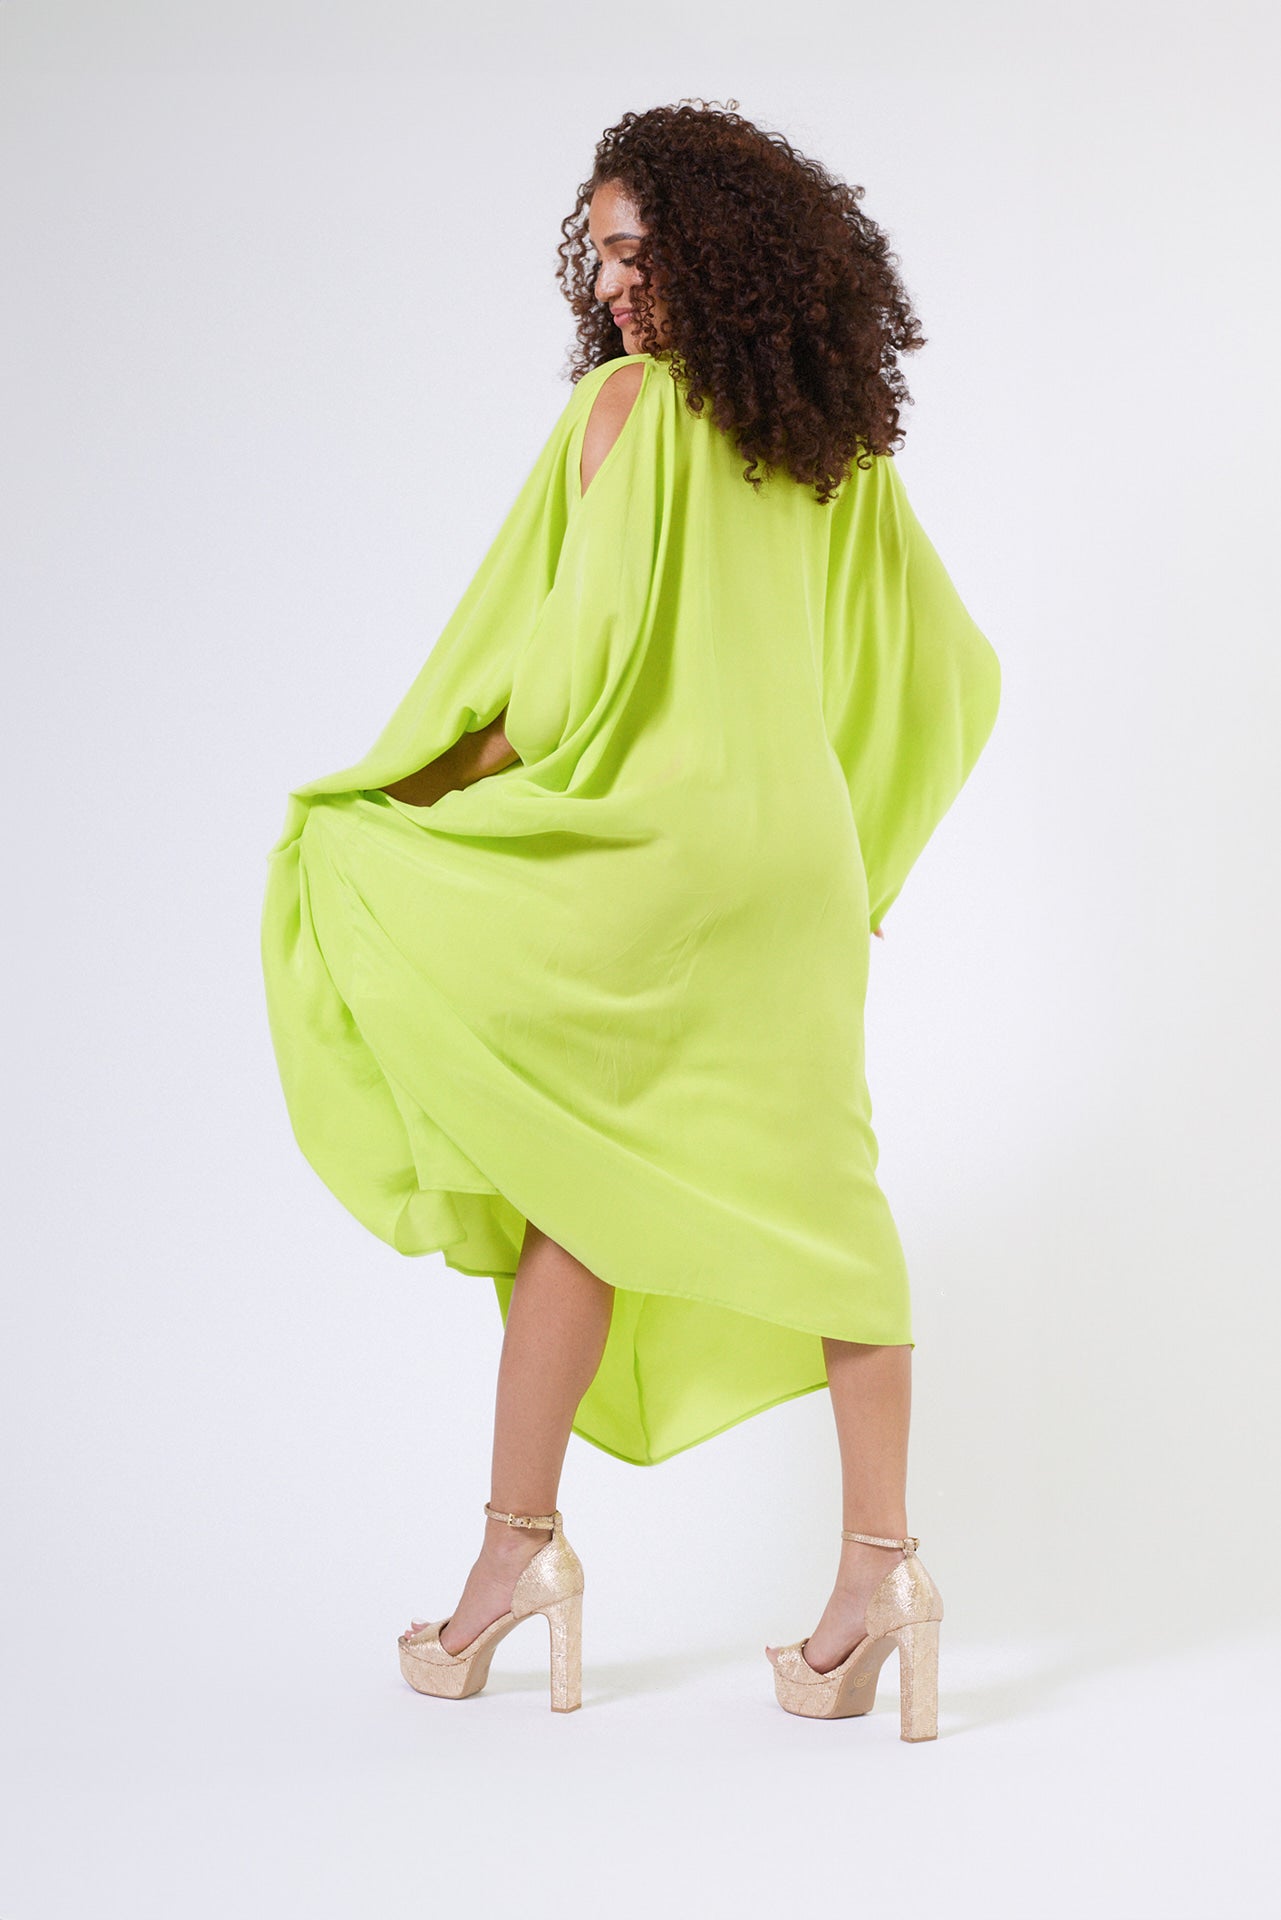 back view of woman wearing bright yellow kaftan duster with front zipper made from recycled materials 2